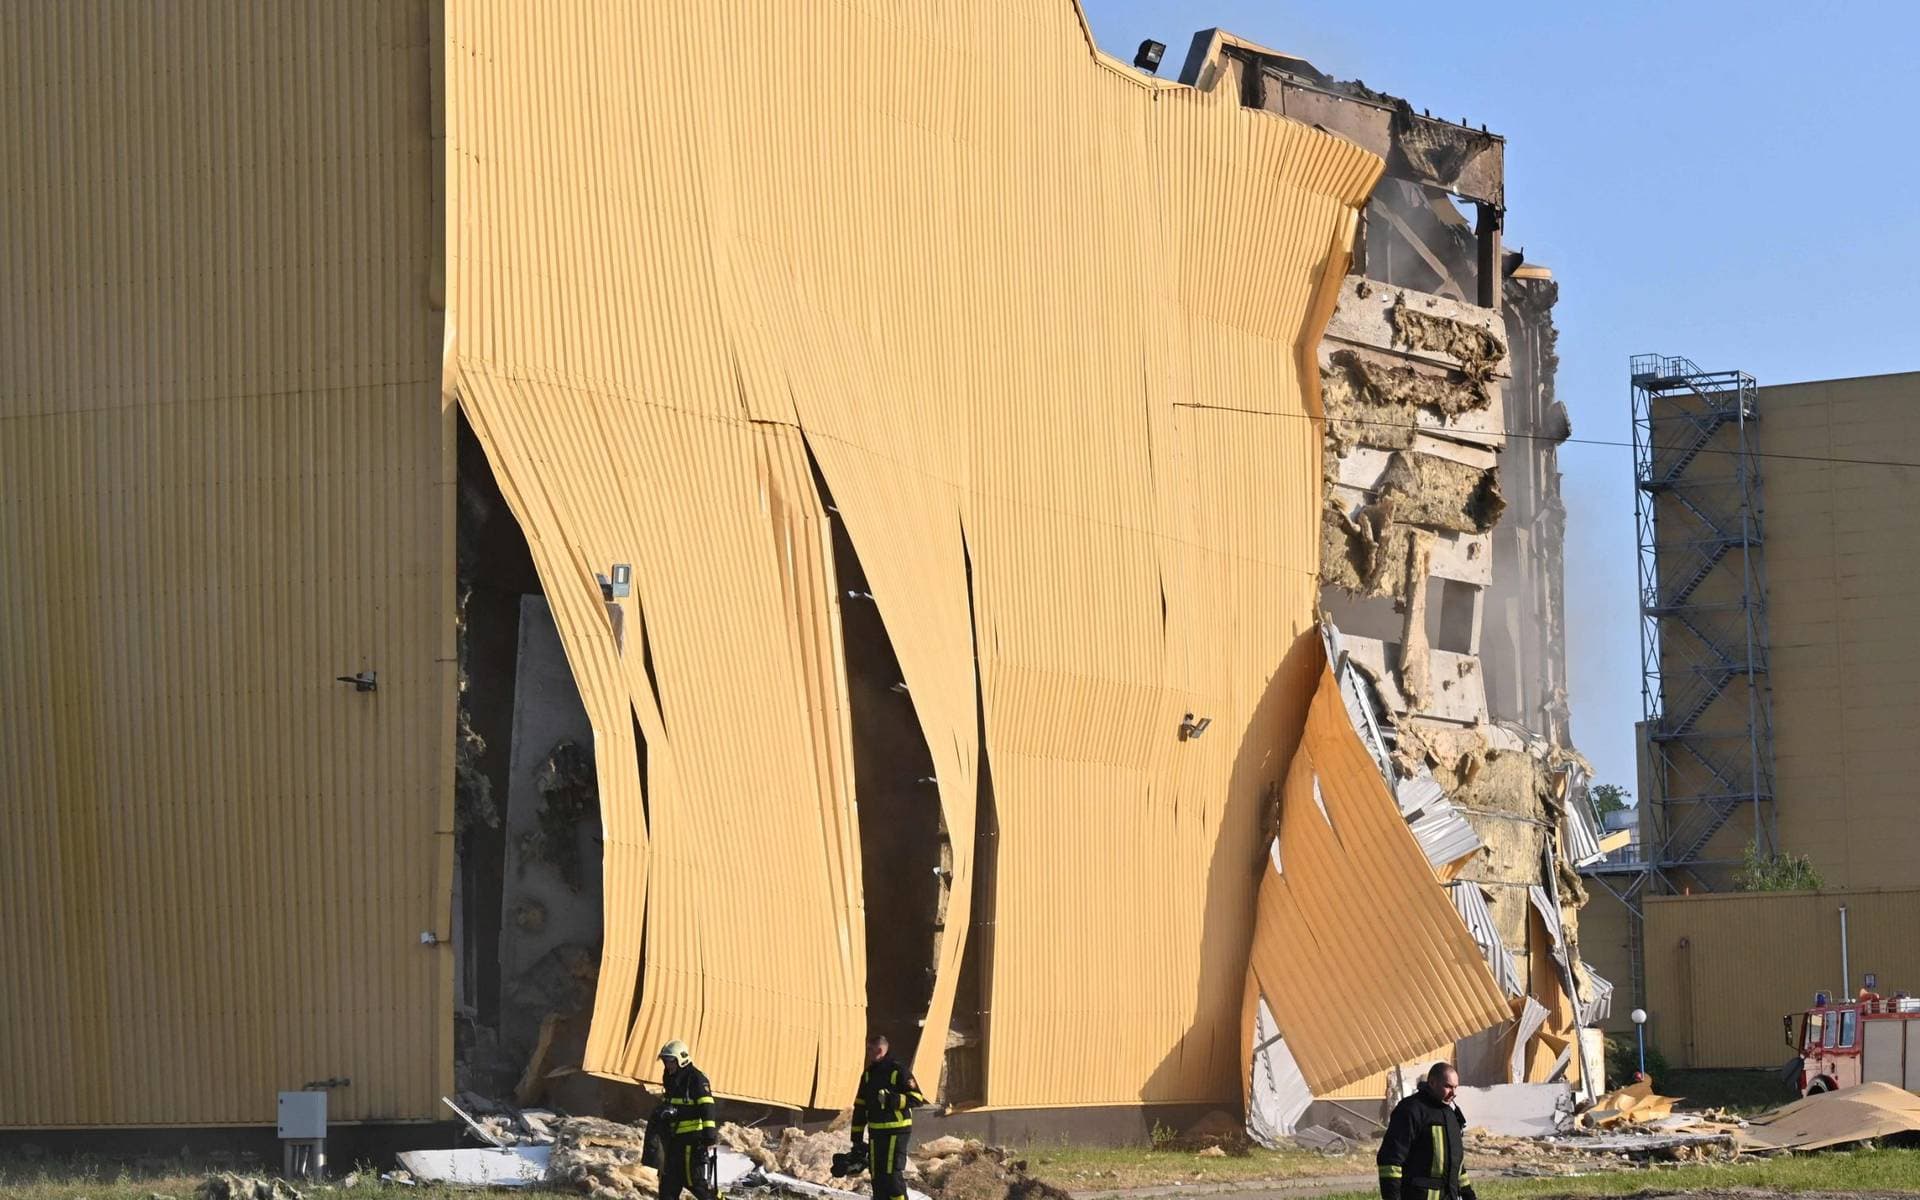 One of the buildings damaged in the drone attacks on Kyiv